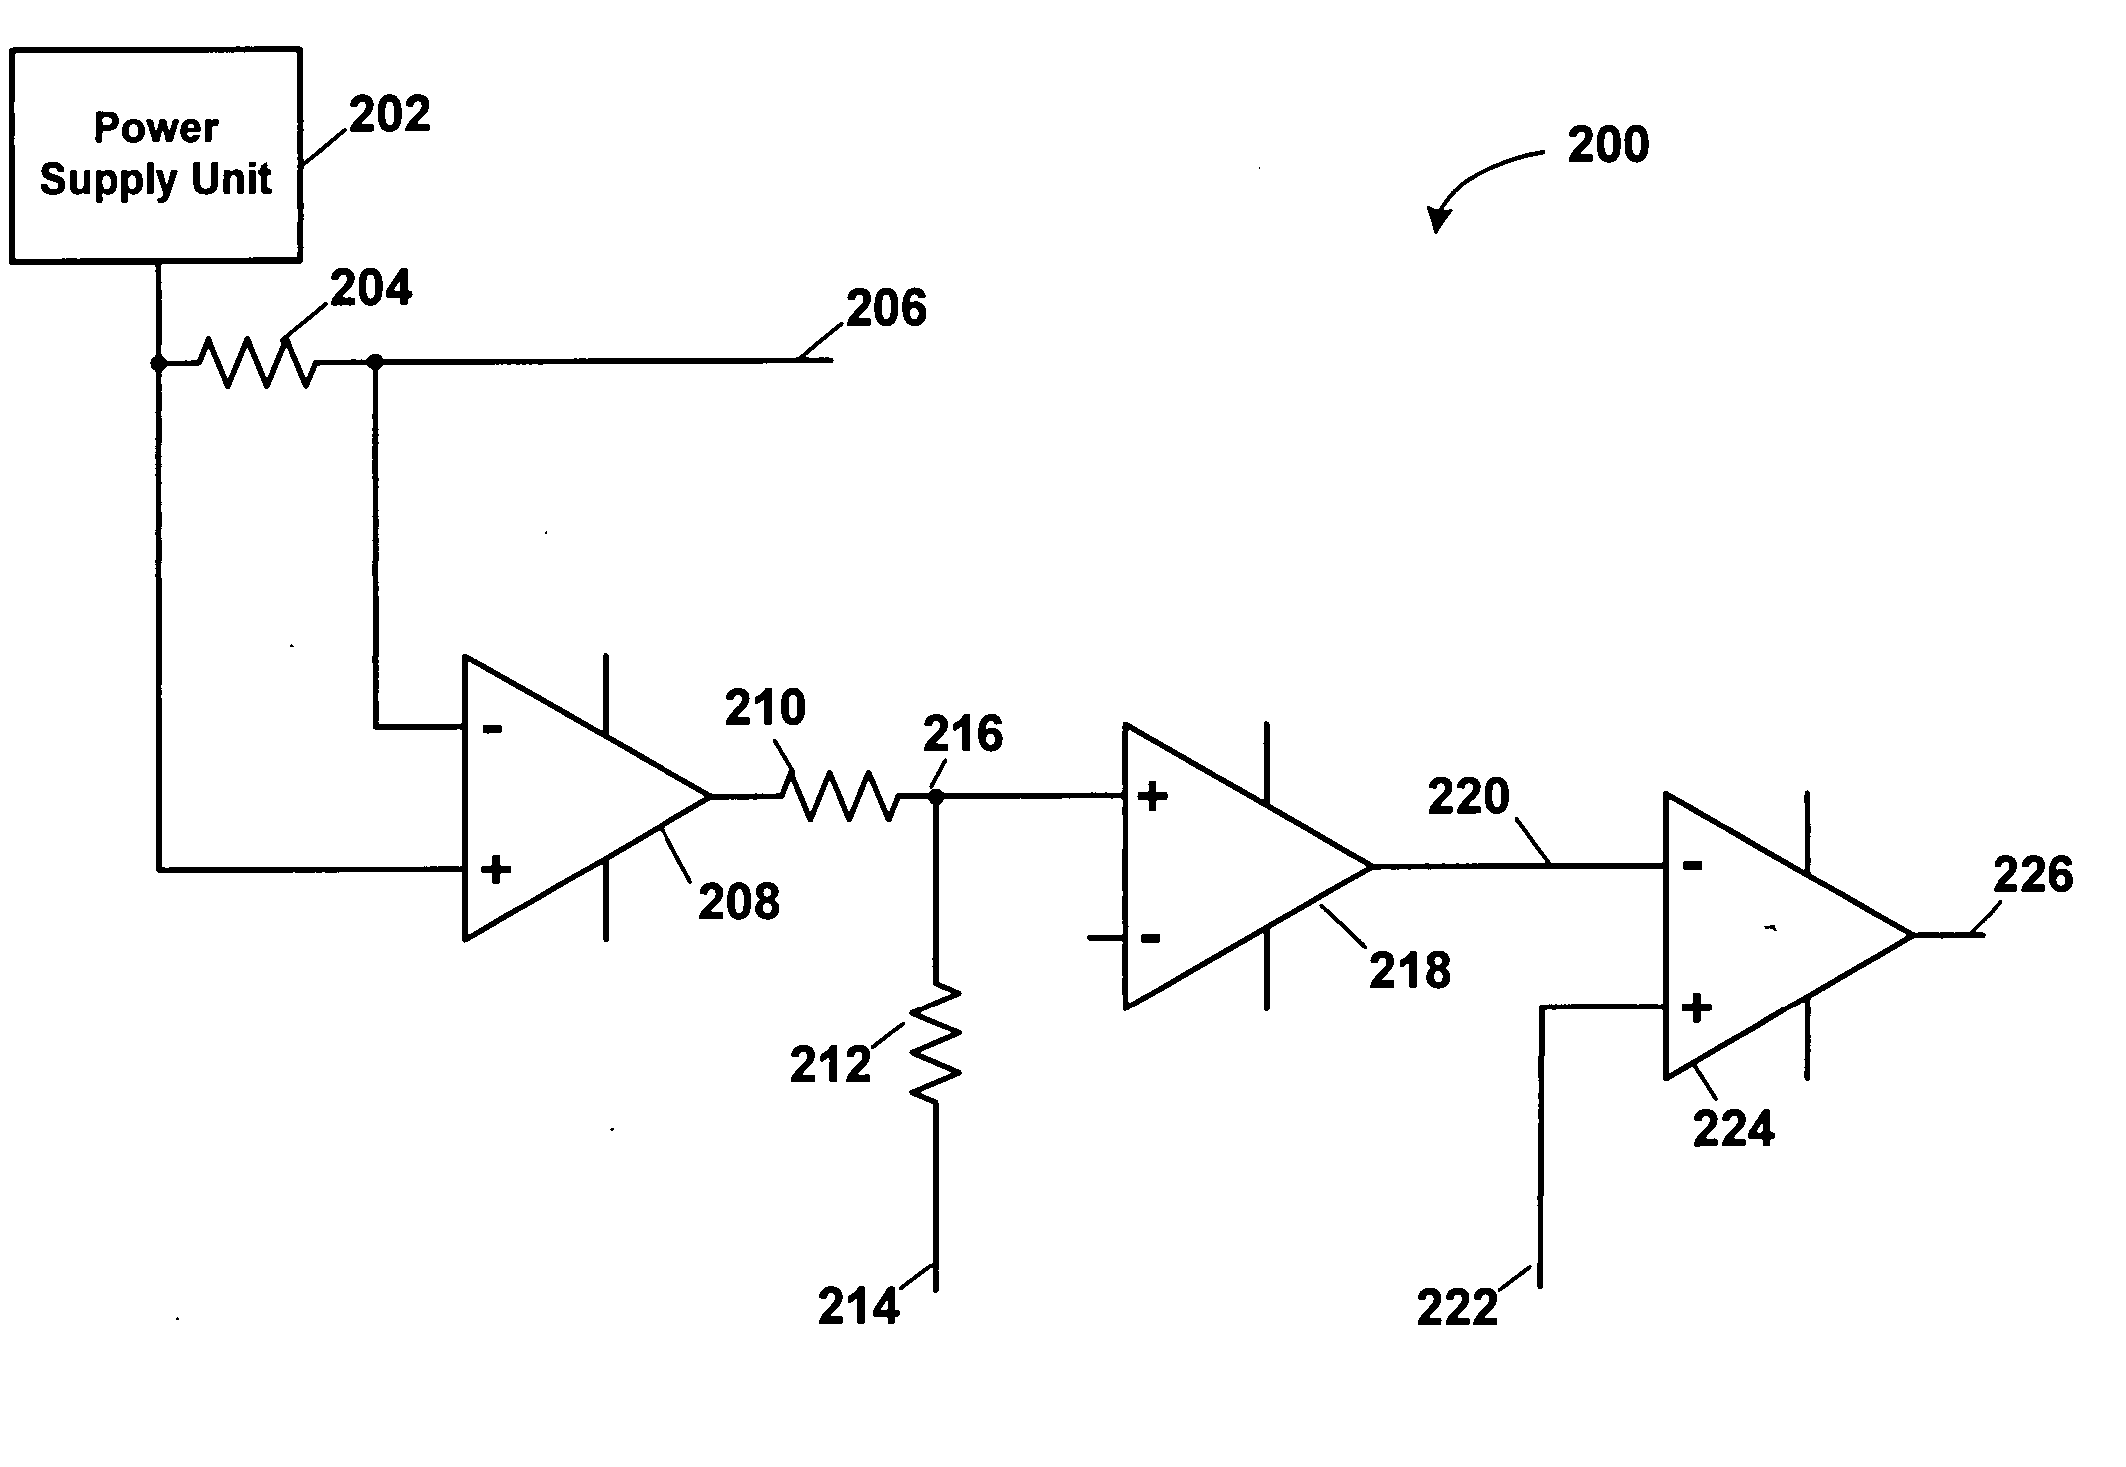 Independent control of output current balance between paralleled power units